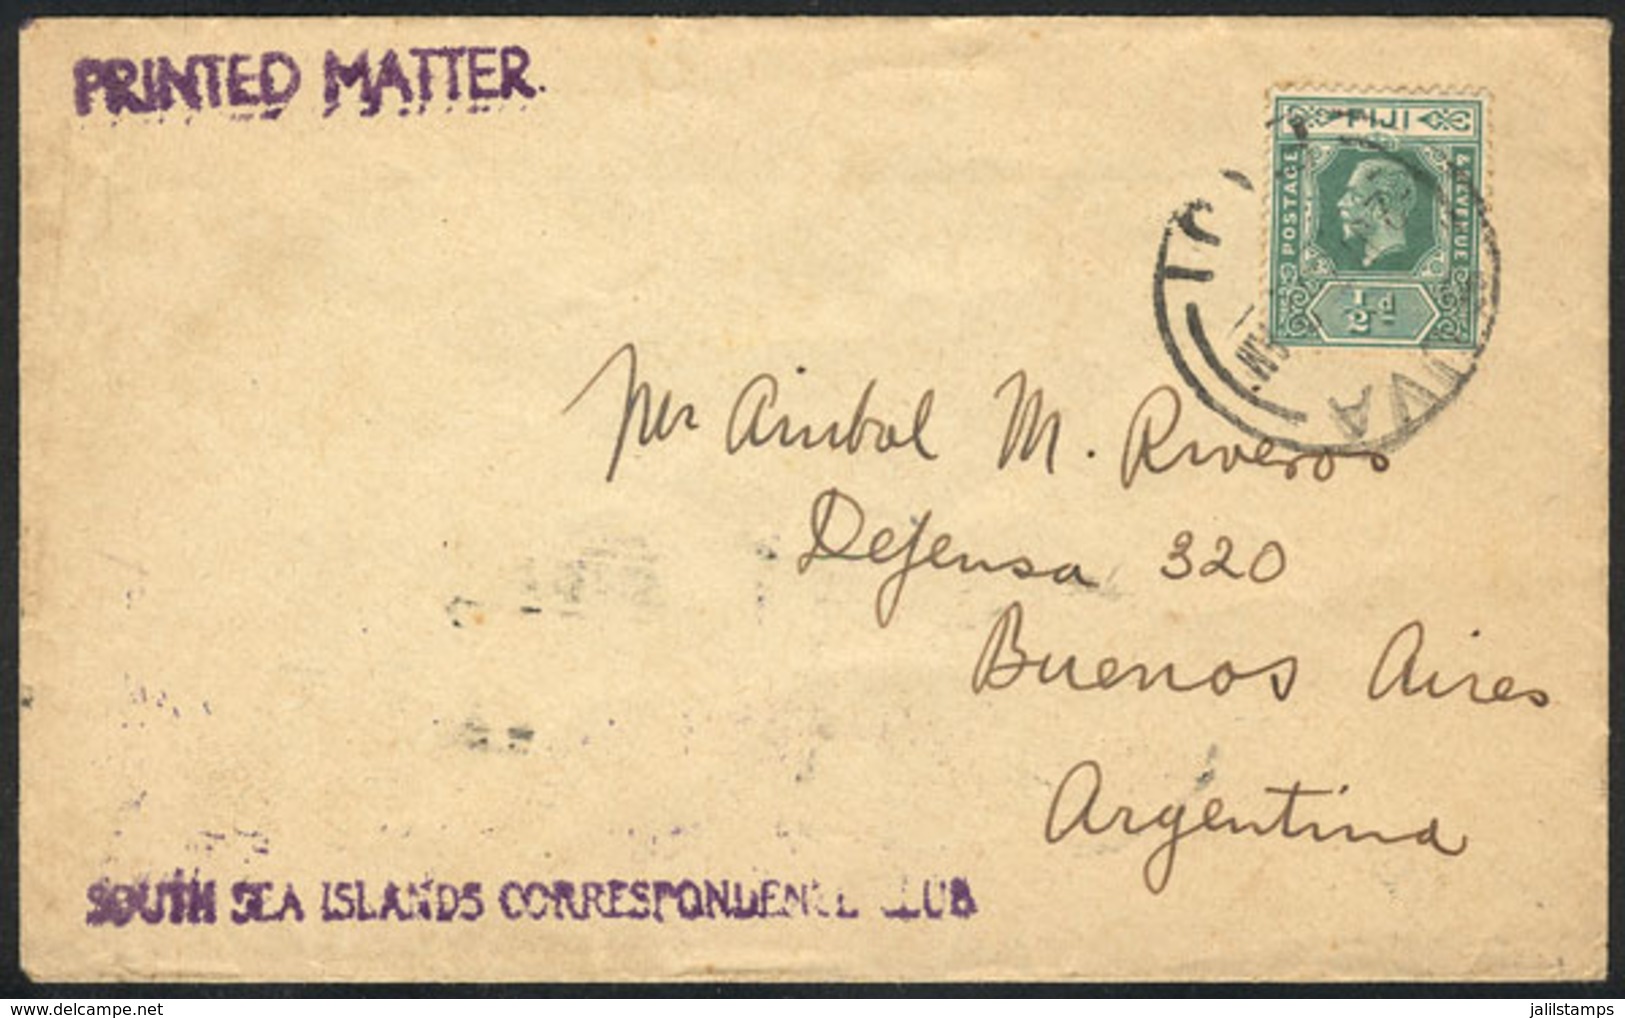 FIJI: 2/JUL/1929 SUVA - Argentina: Cover With Printed Matter, Franked With ½p., With Buenos Aires Arrival Backstamp Of 1 - Fidji (1970-...)